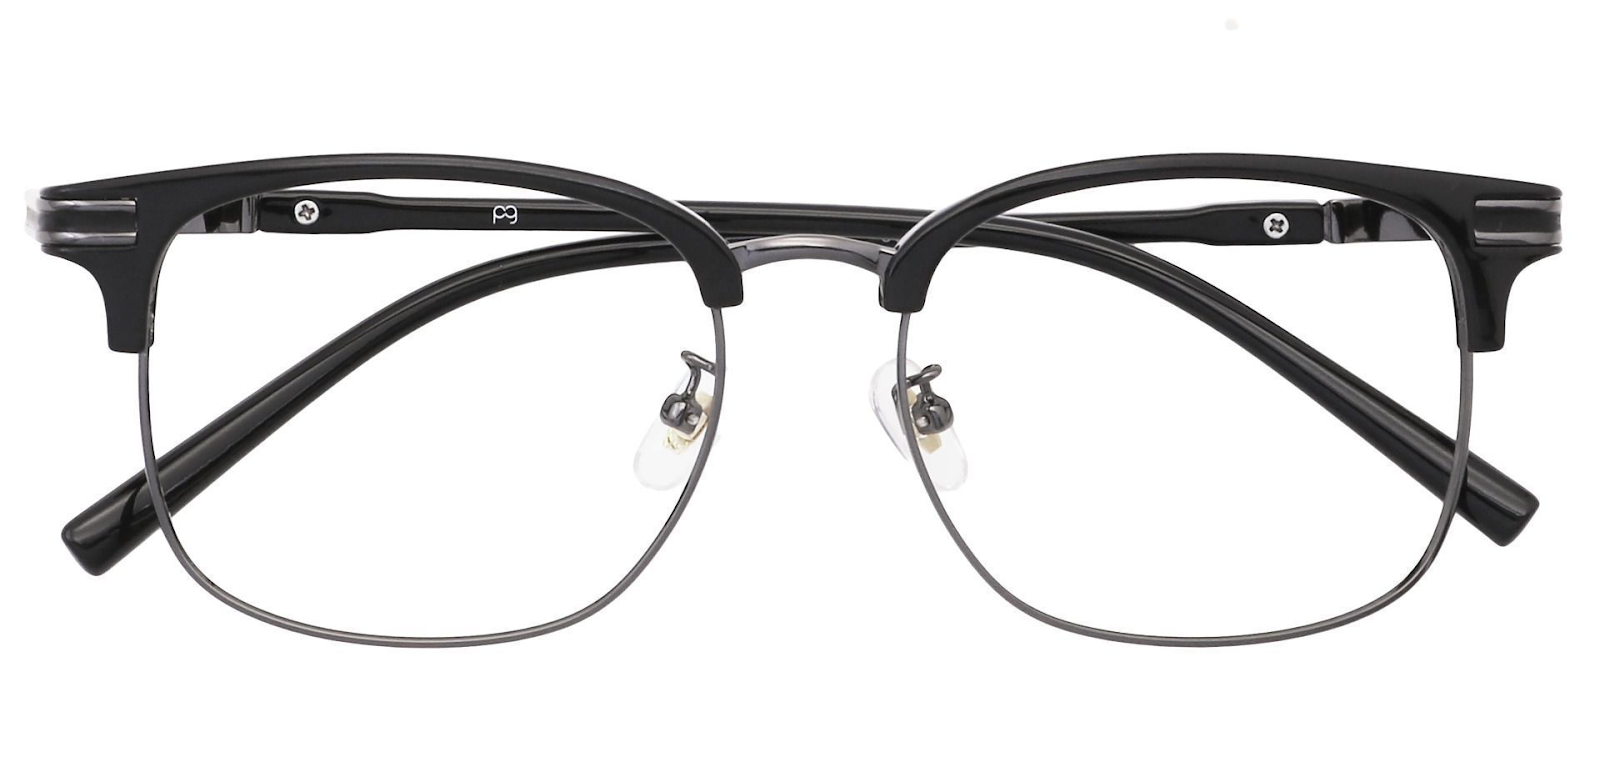 A pair of glasses with black Cafe Browline frames.